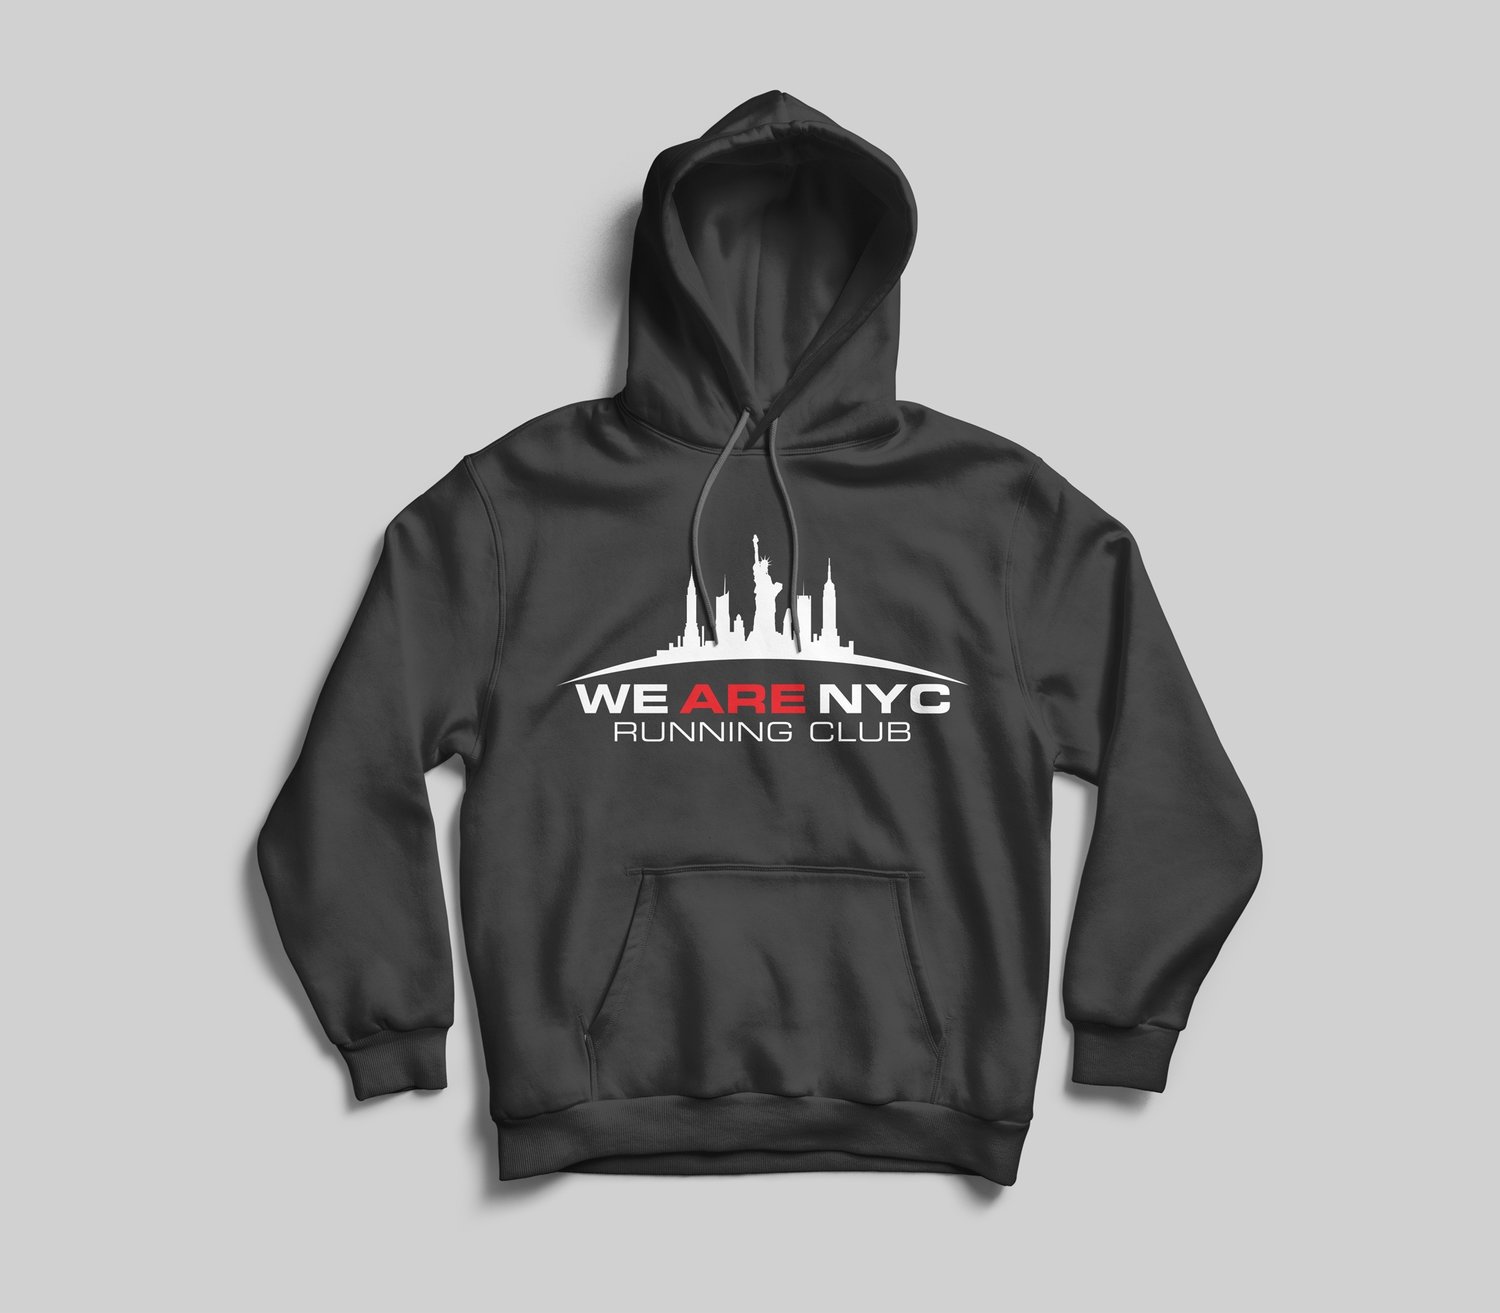 *YOUTH* WE ARE NYC OFFICIAL LOGO HOODED SWEATSHIRT - AVAILABLE IN 6 COLORS!